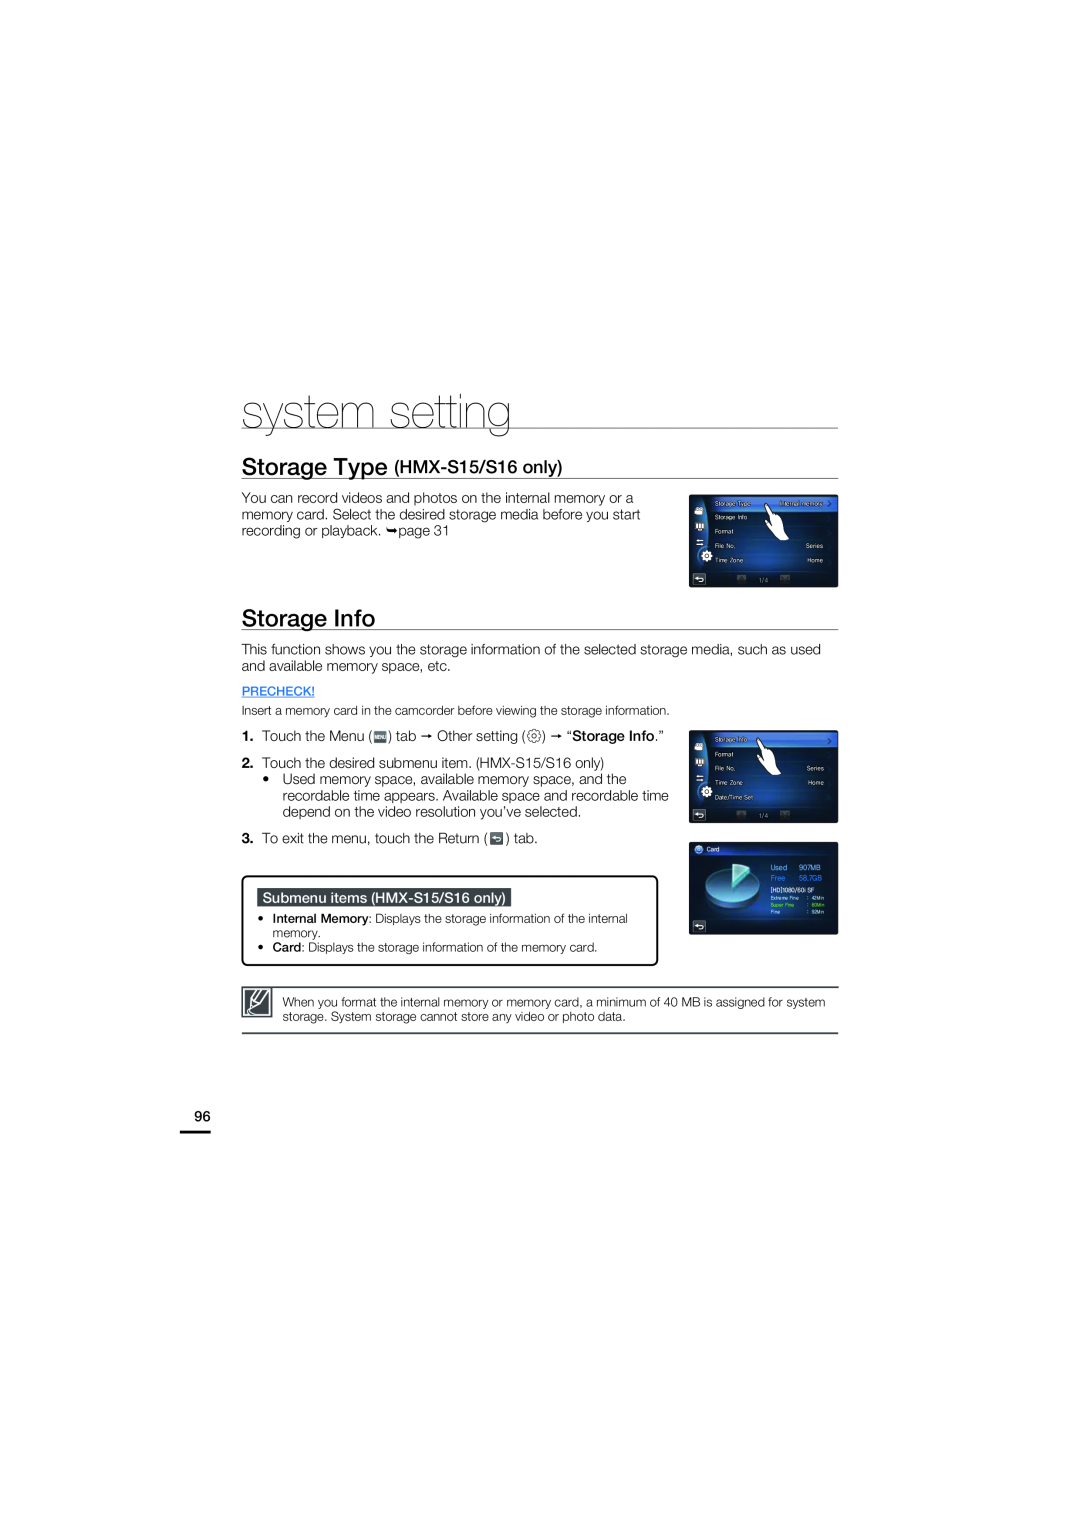 Samsung HMX-S15BN/XAA manual Storage Info, Storage Type HMX-S15/S16 only, Submenu items HMX-S15/S16 only, system setting 